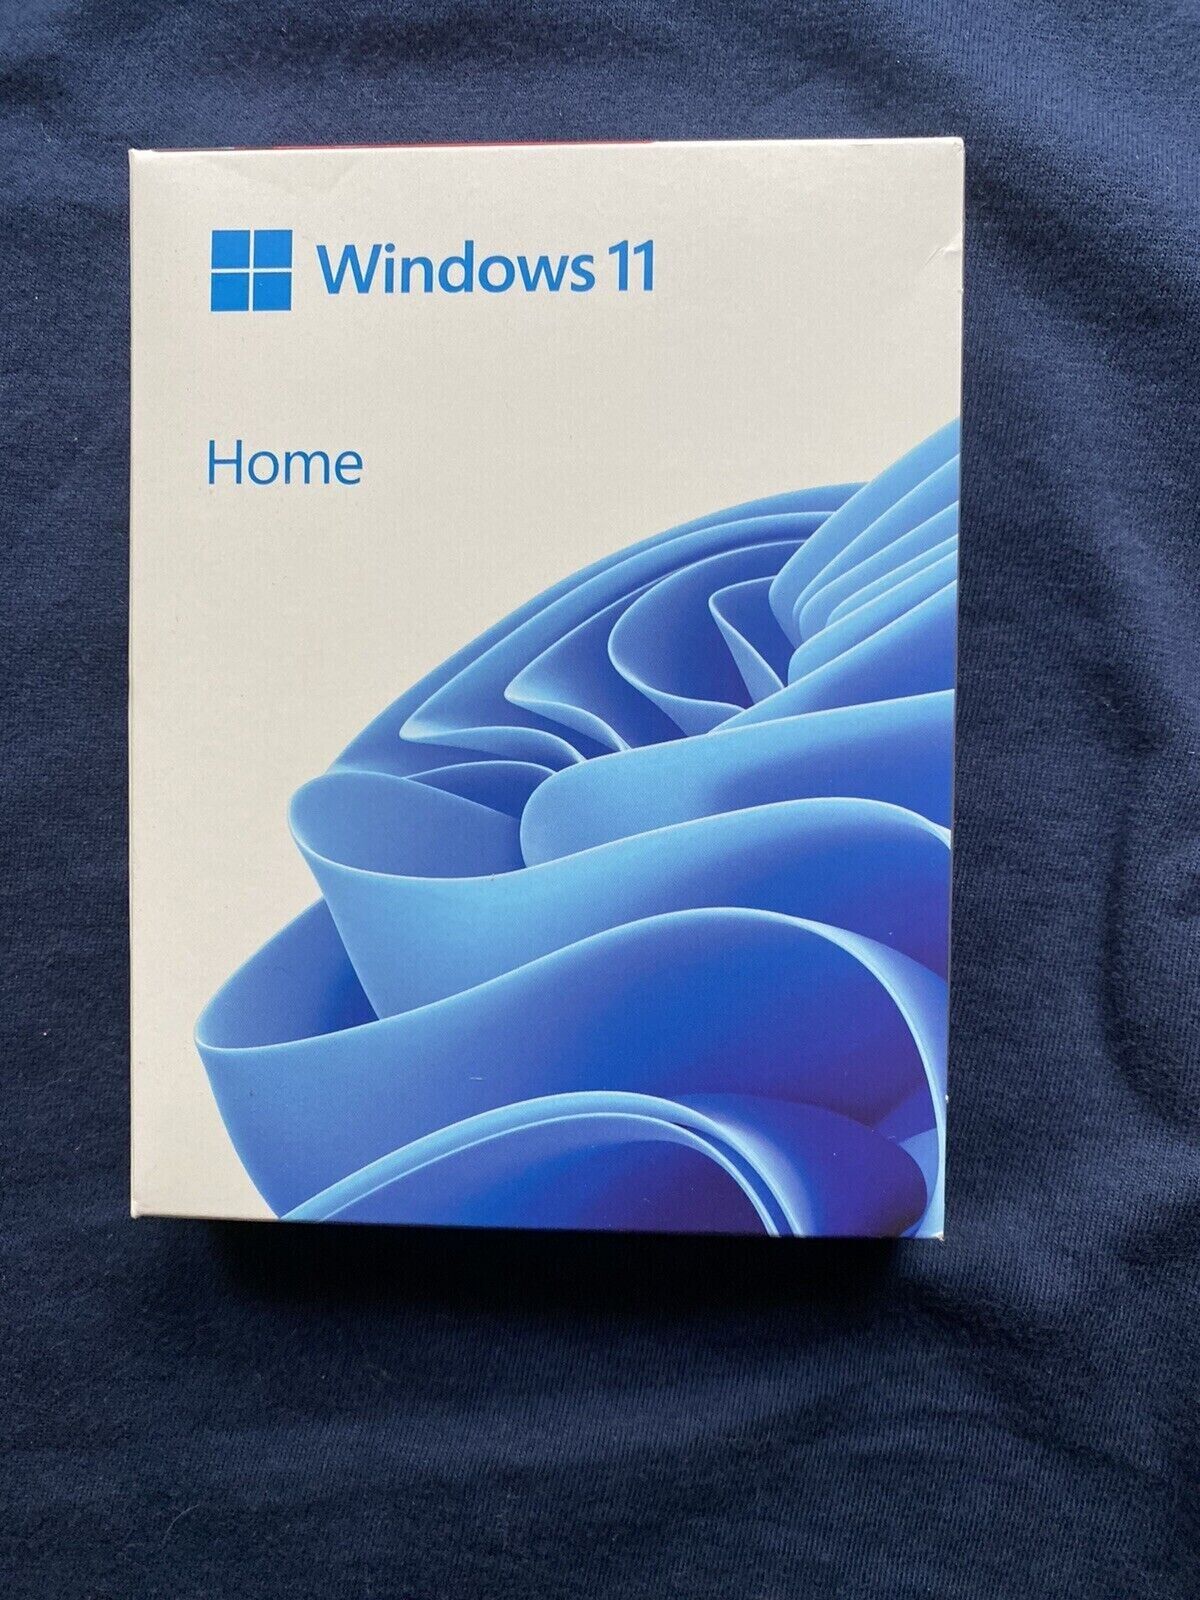 Genuine Microsoft Windows 11 Home Installer USB with Activation Key Included